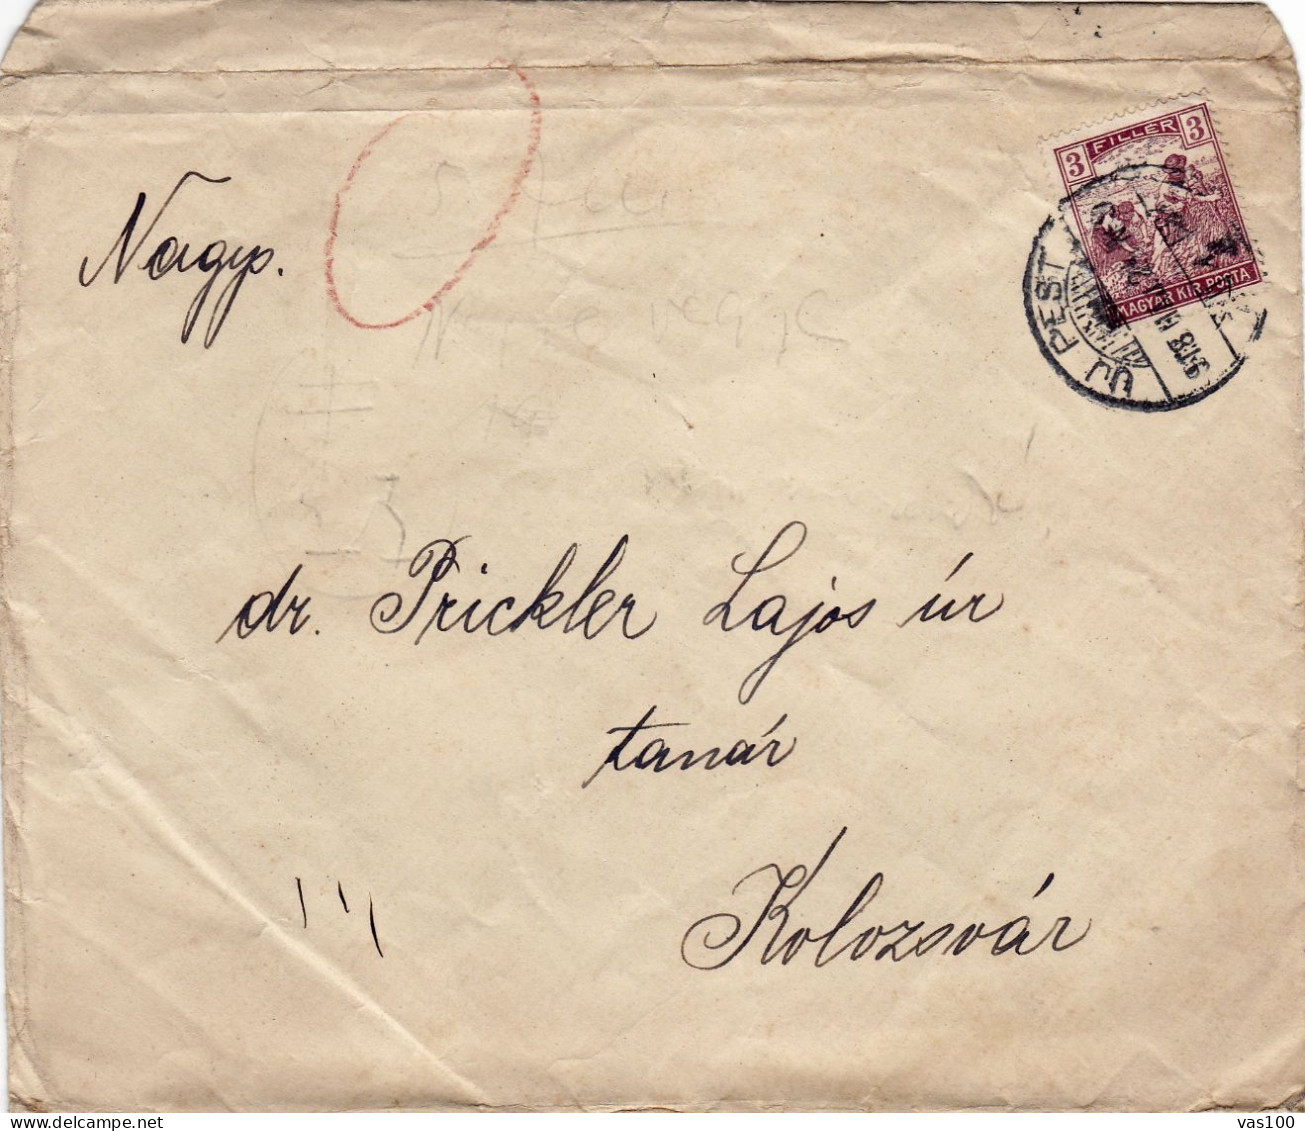 GRAINS HARVESTERS STAMPS ON  COVER / 3 FILER 1918,HUNGARY - Lettres & Documents